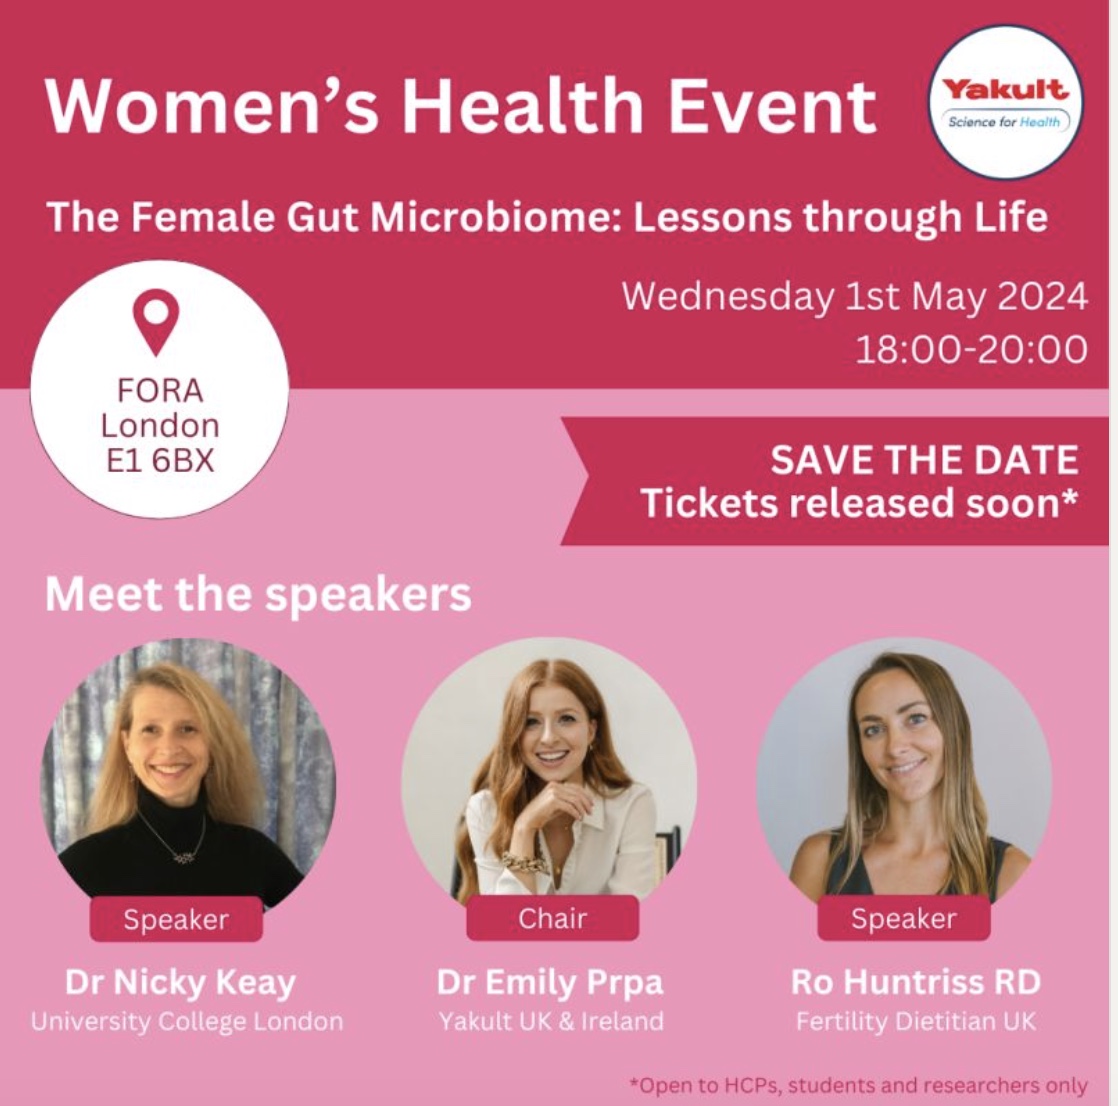 Weds 1/5/24 Looking forward to discussing #hormones #gutmicrobiome #nutrition #perimenopause #menopause eventbrite.co.uk/e/the-female-g…